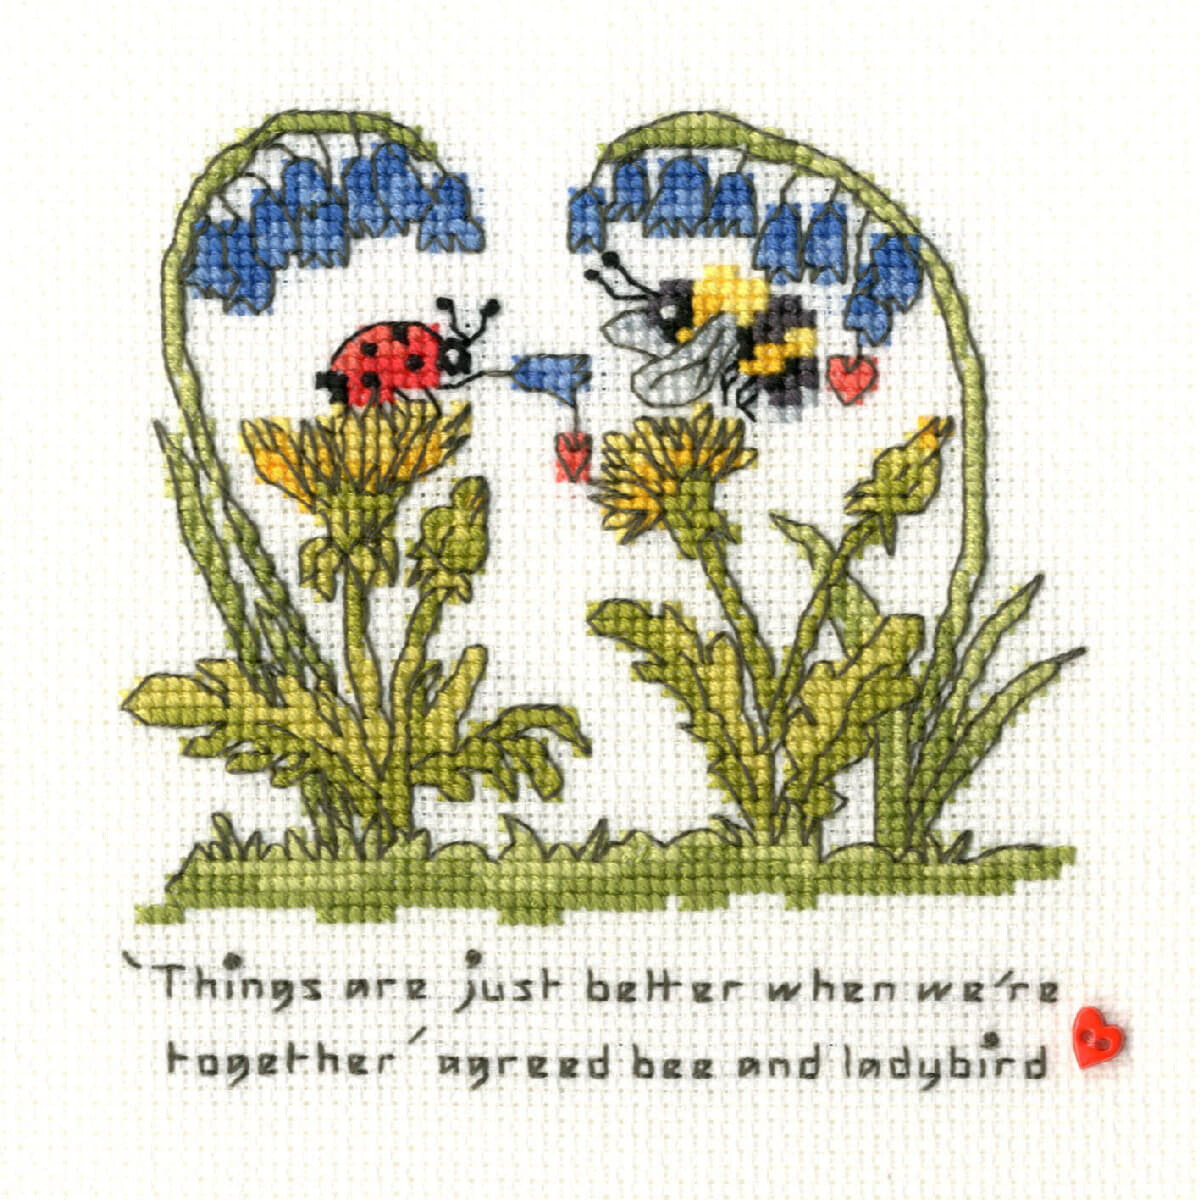 A charming embroidery pack from Bothy Threads shows a...